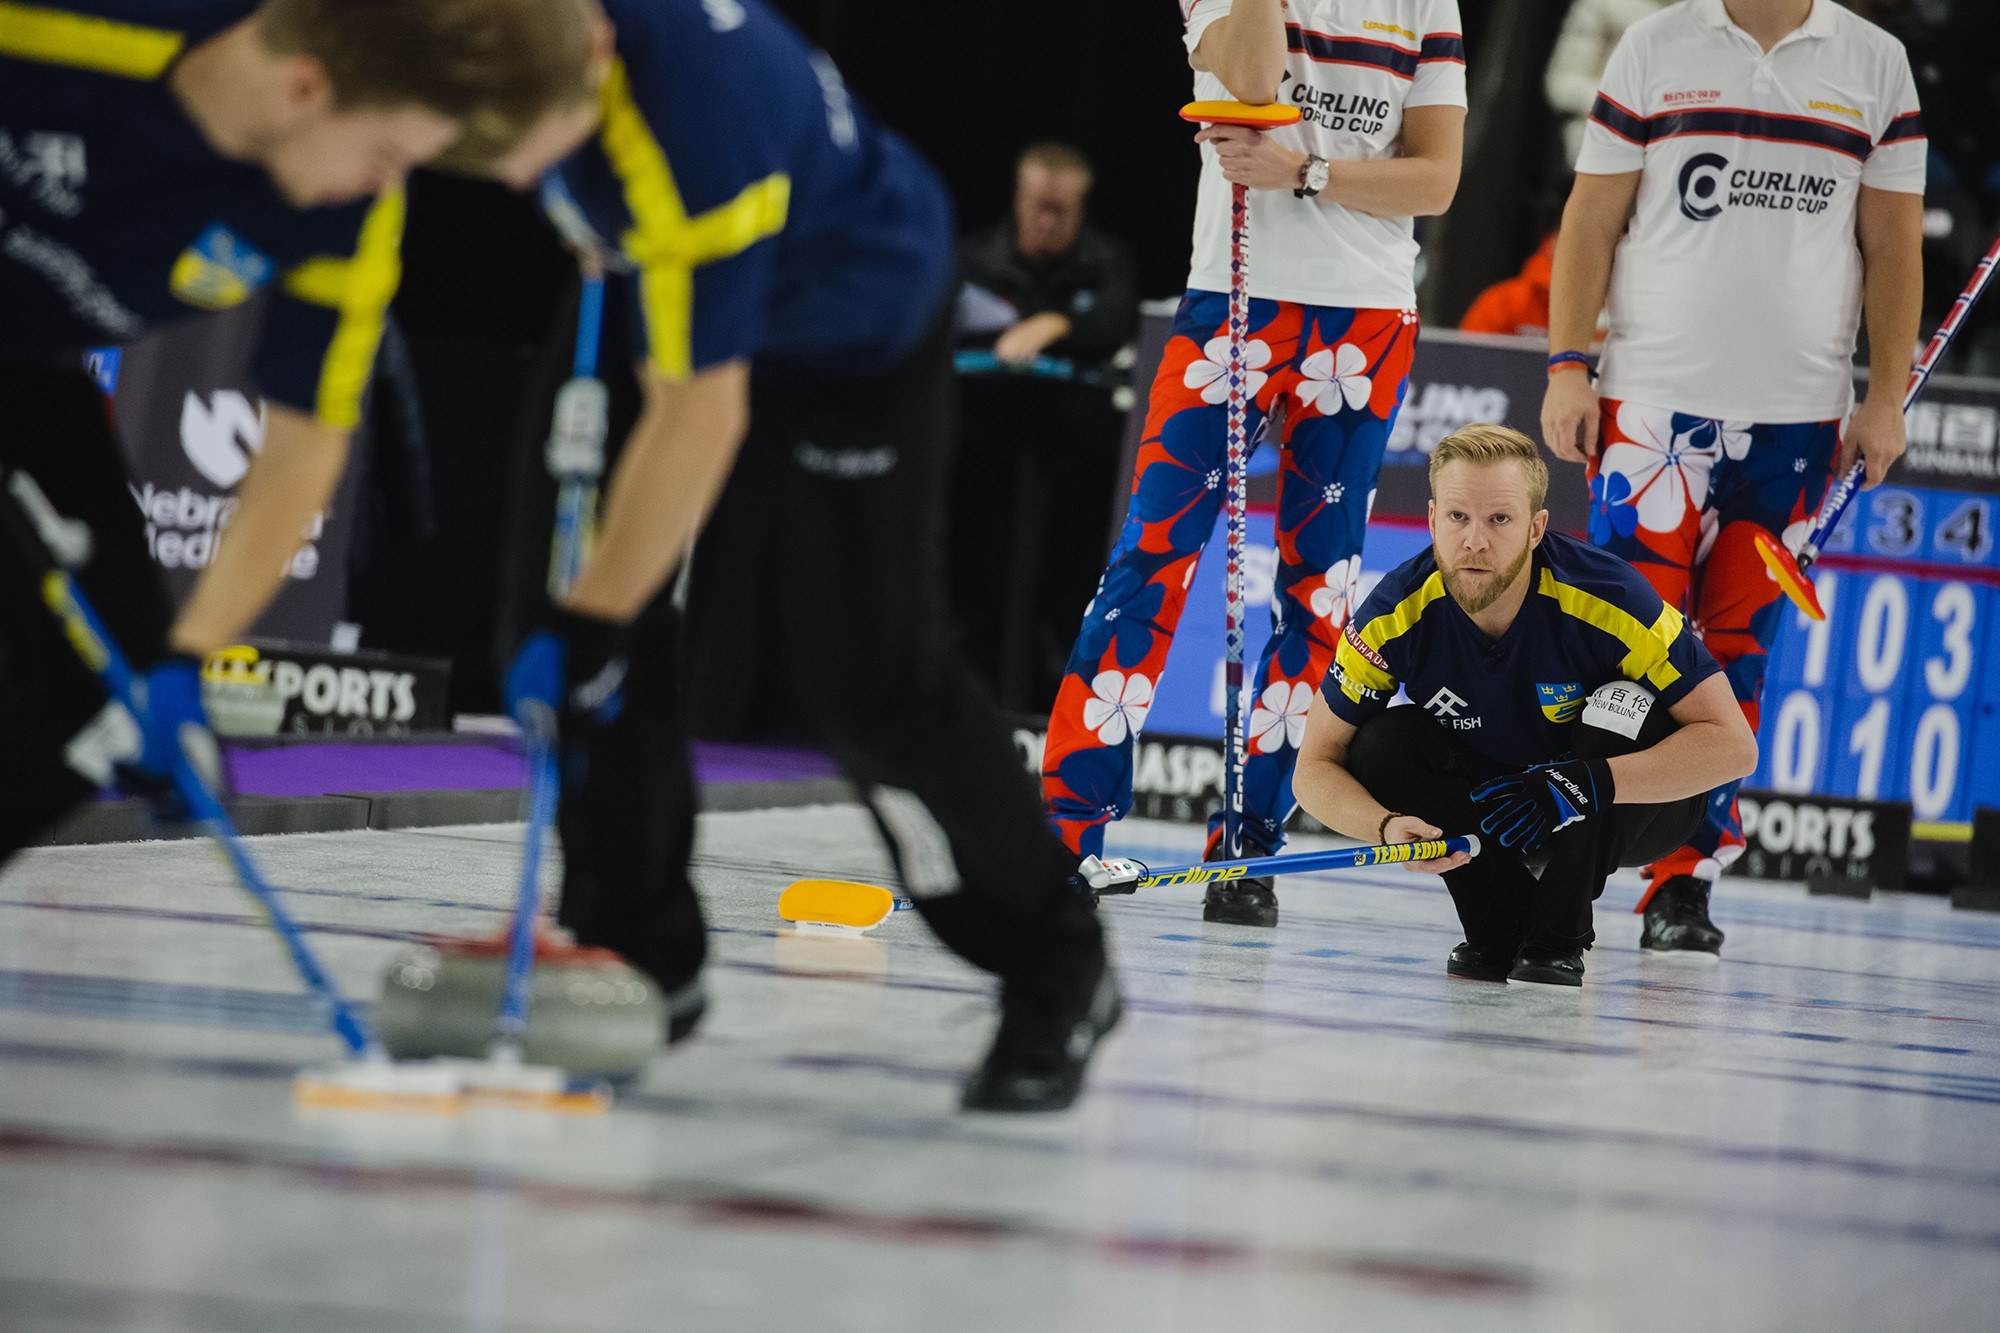 Olympic final rematch to take place between Sweden and United States at Curling World Cup in Omaha